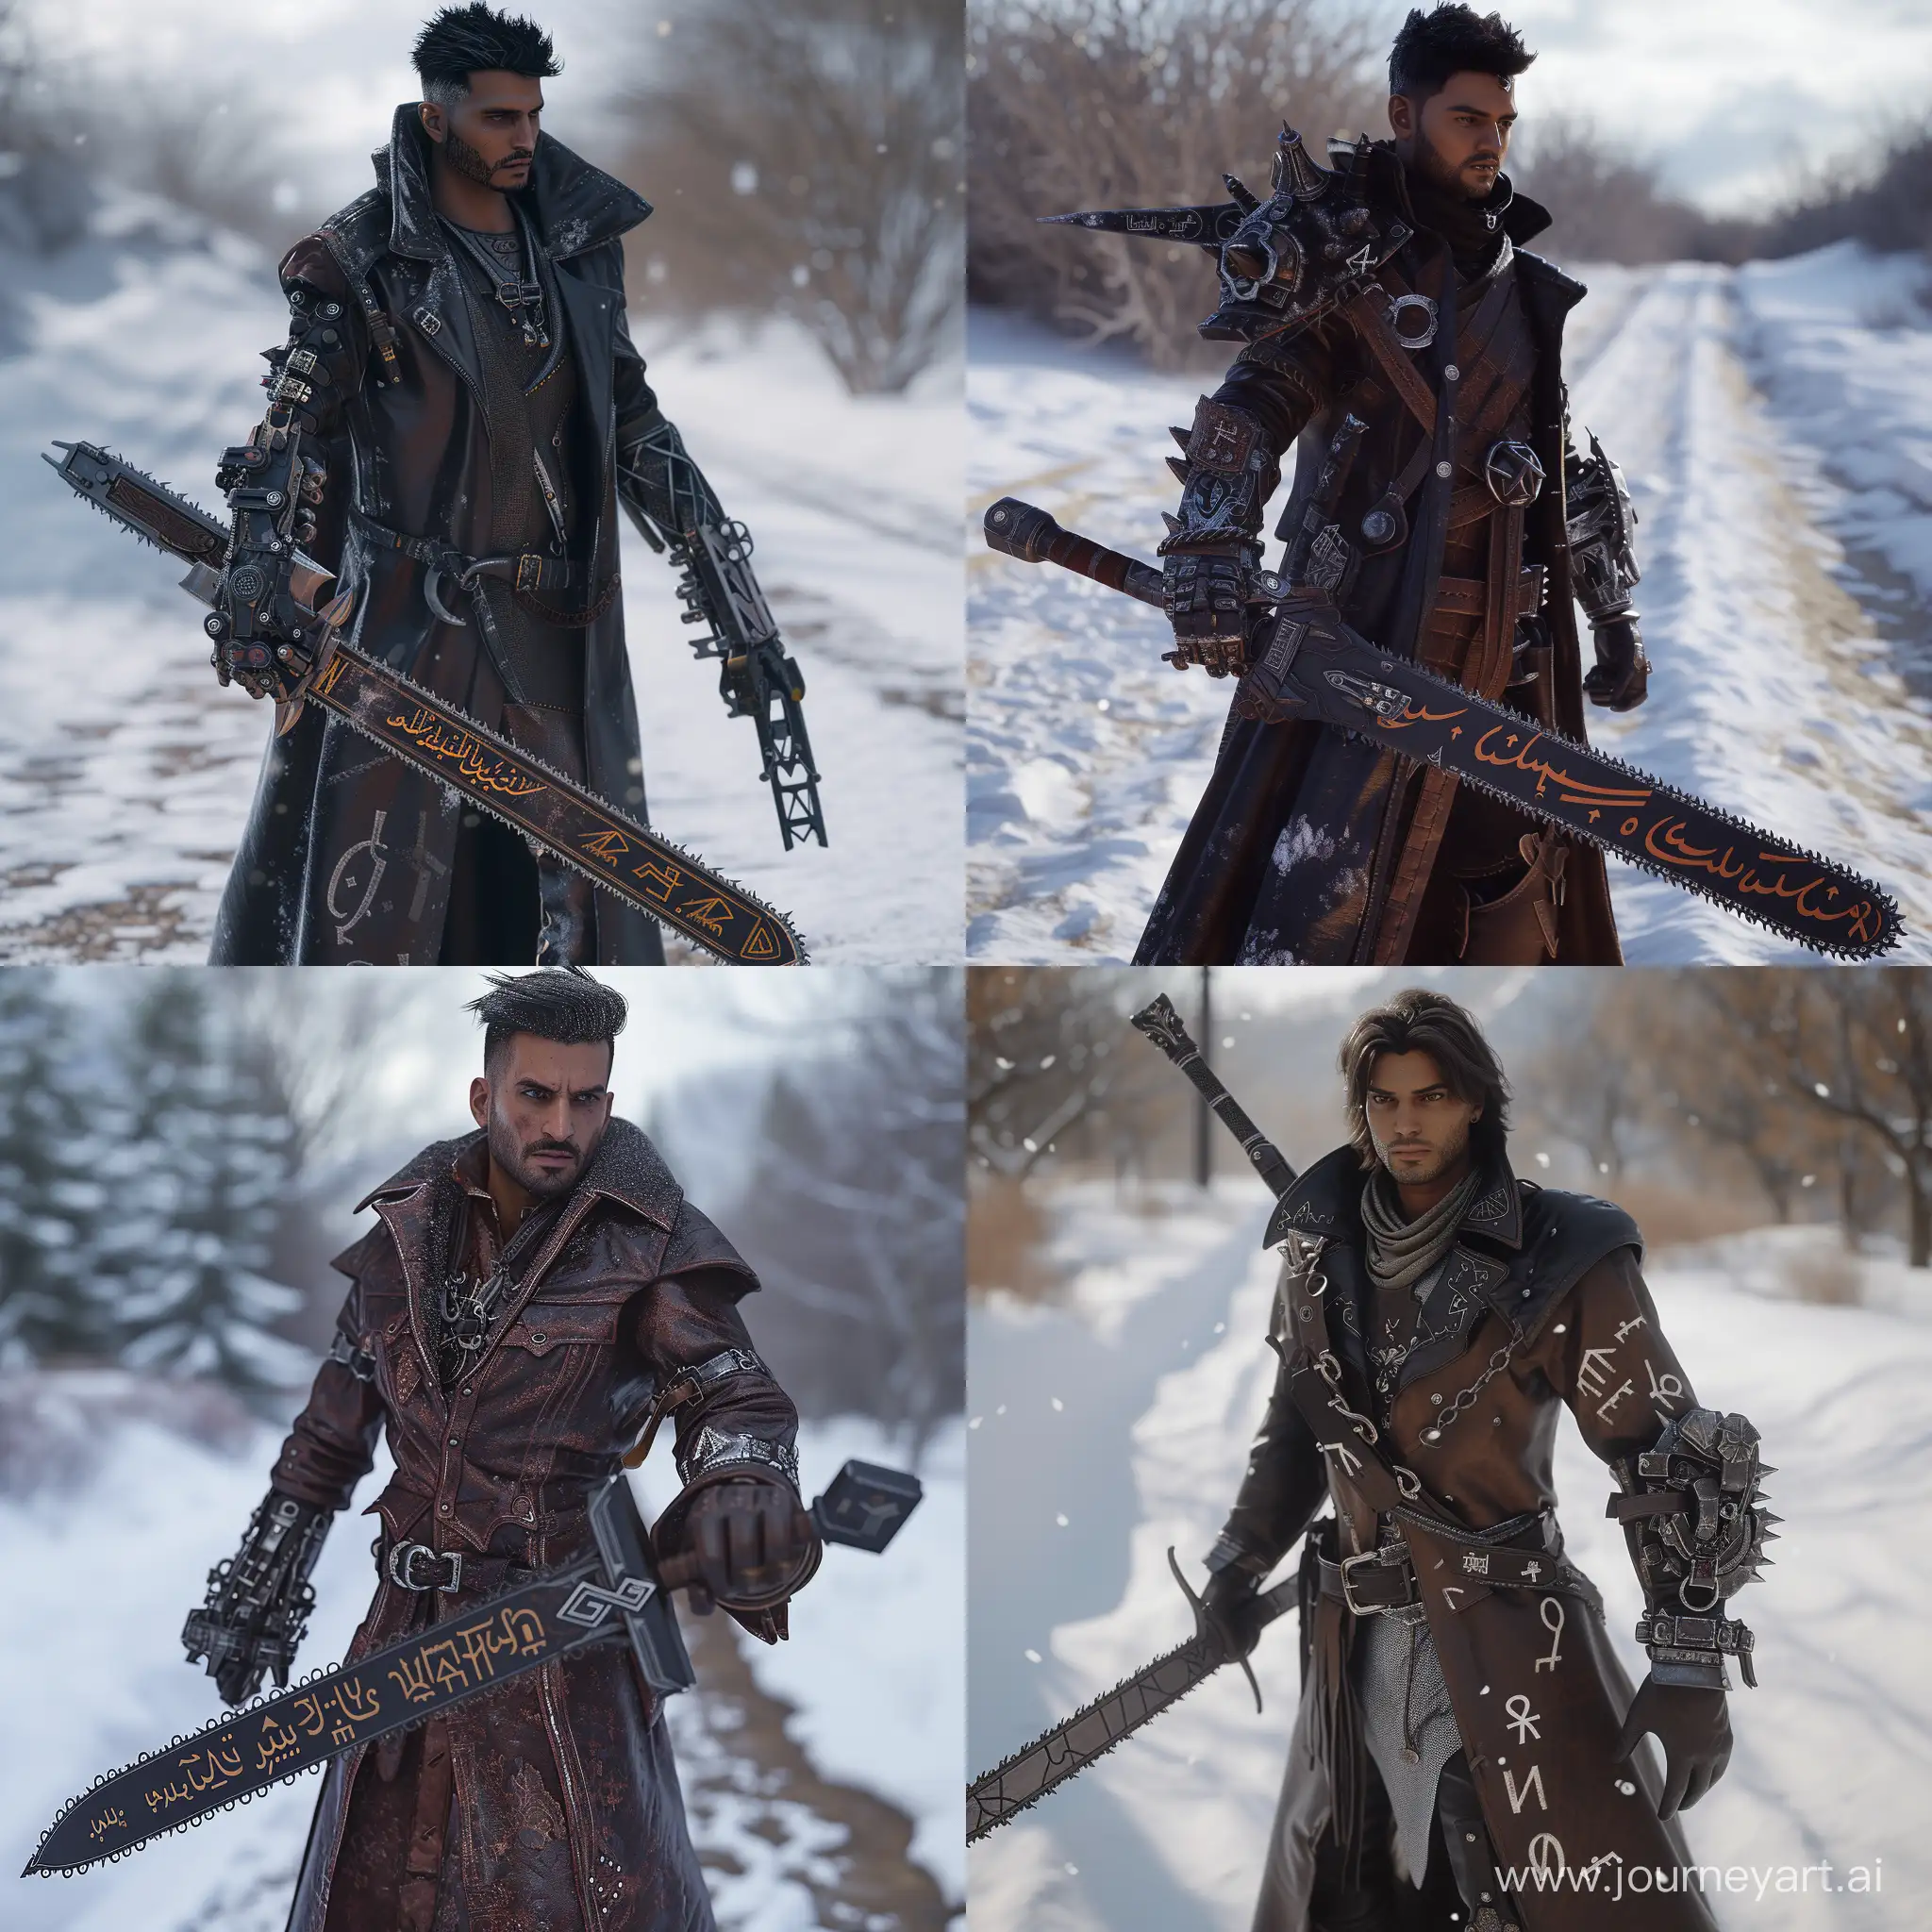 persian man[18 years old,handsome,beautiful,Long leather coat]with sword [chainsaw blades,cuneiform letters curving on it]and mechanical armglove[powerful,intricate],in snow near Dirt Road,incredible detail,Steampunk,Unreal engine 5.